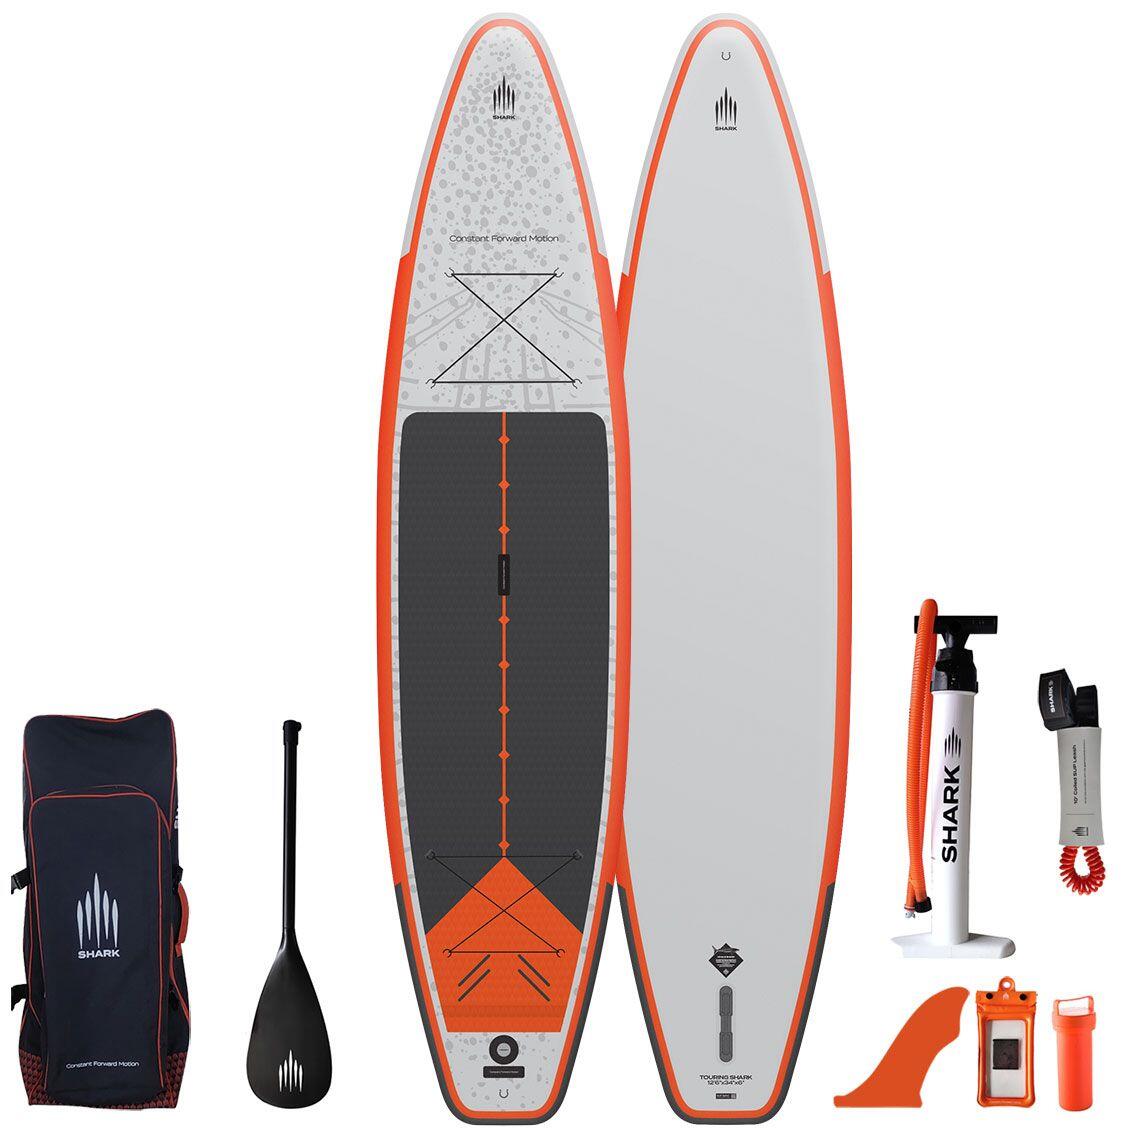 SHARK TOURING 12'6 x 34" x 6" FOR TALLER AND HEAVIER PADDLEBOARDERS 1/6